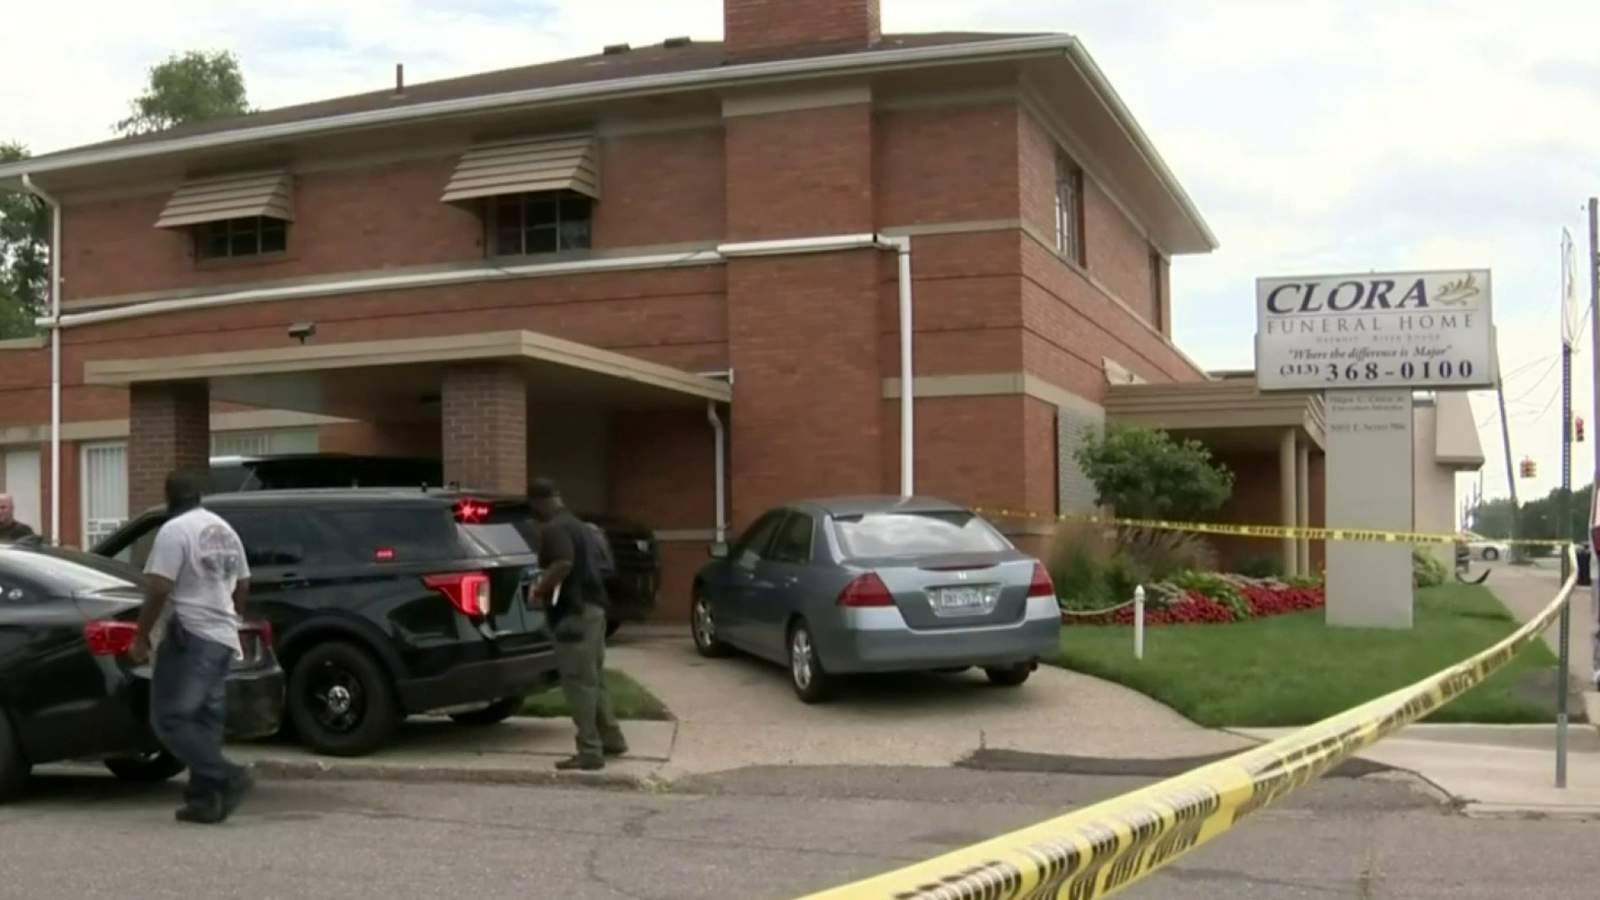 Man killed outside of funeral home on Detroit's west side